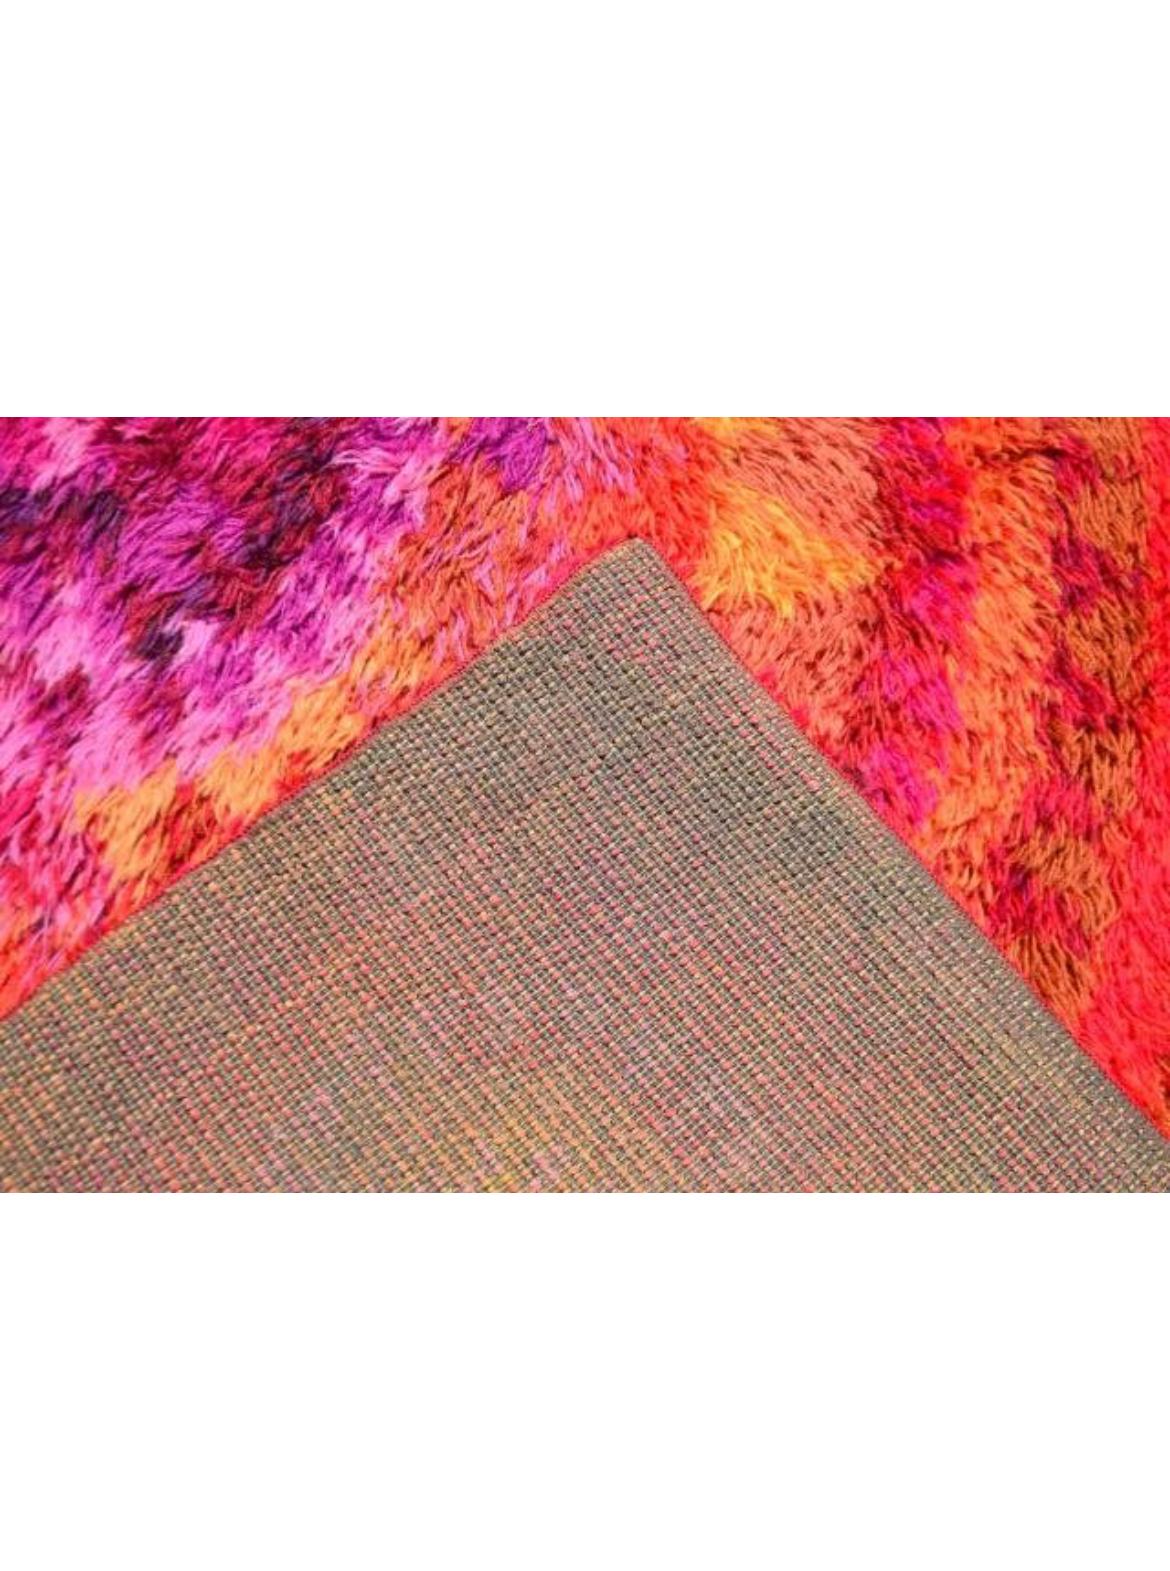 Hand-Woven Trippy Midcentury Vintage Rya Rug Vibrant Very Colorful Spirals Sweden